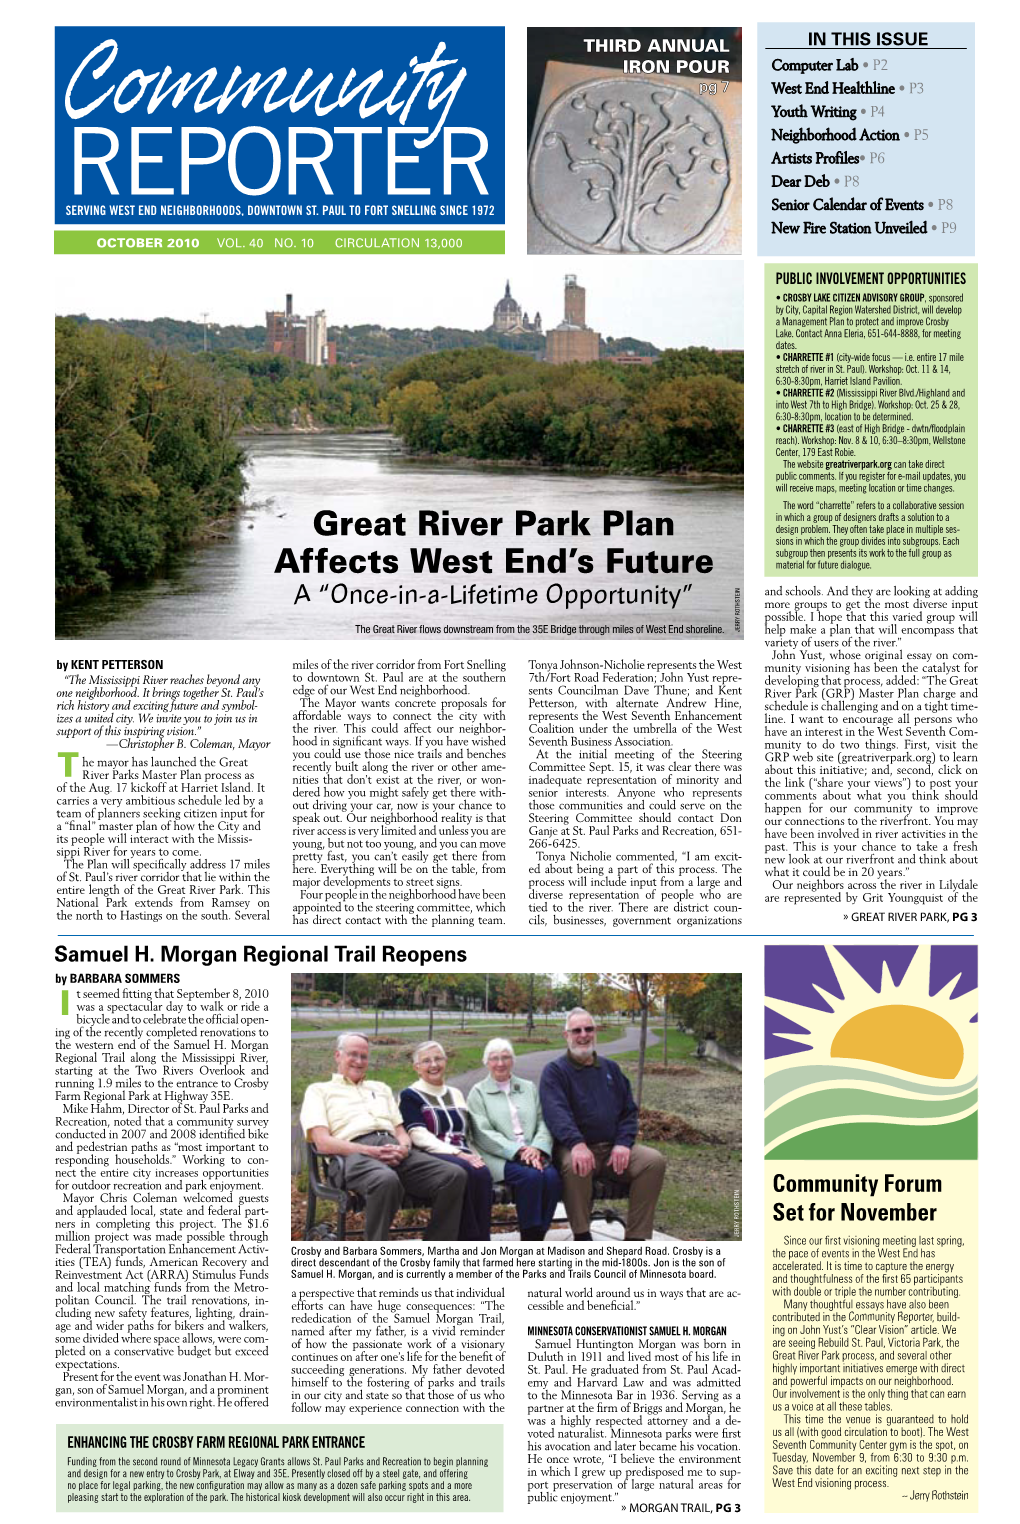 Great River Park Plan Affects West End's Future